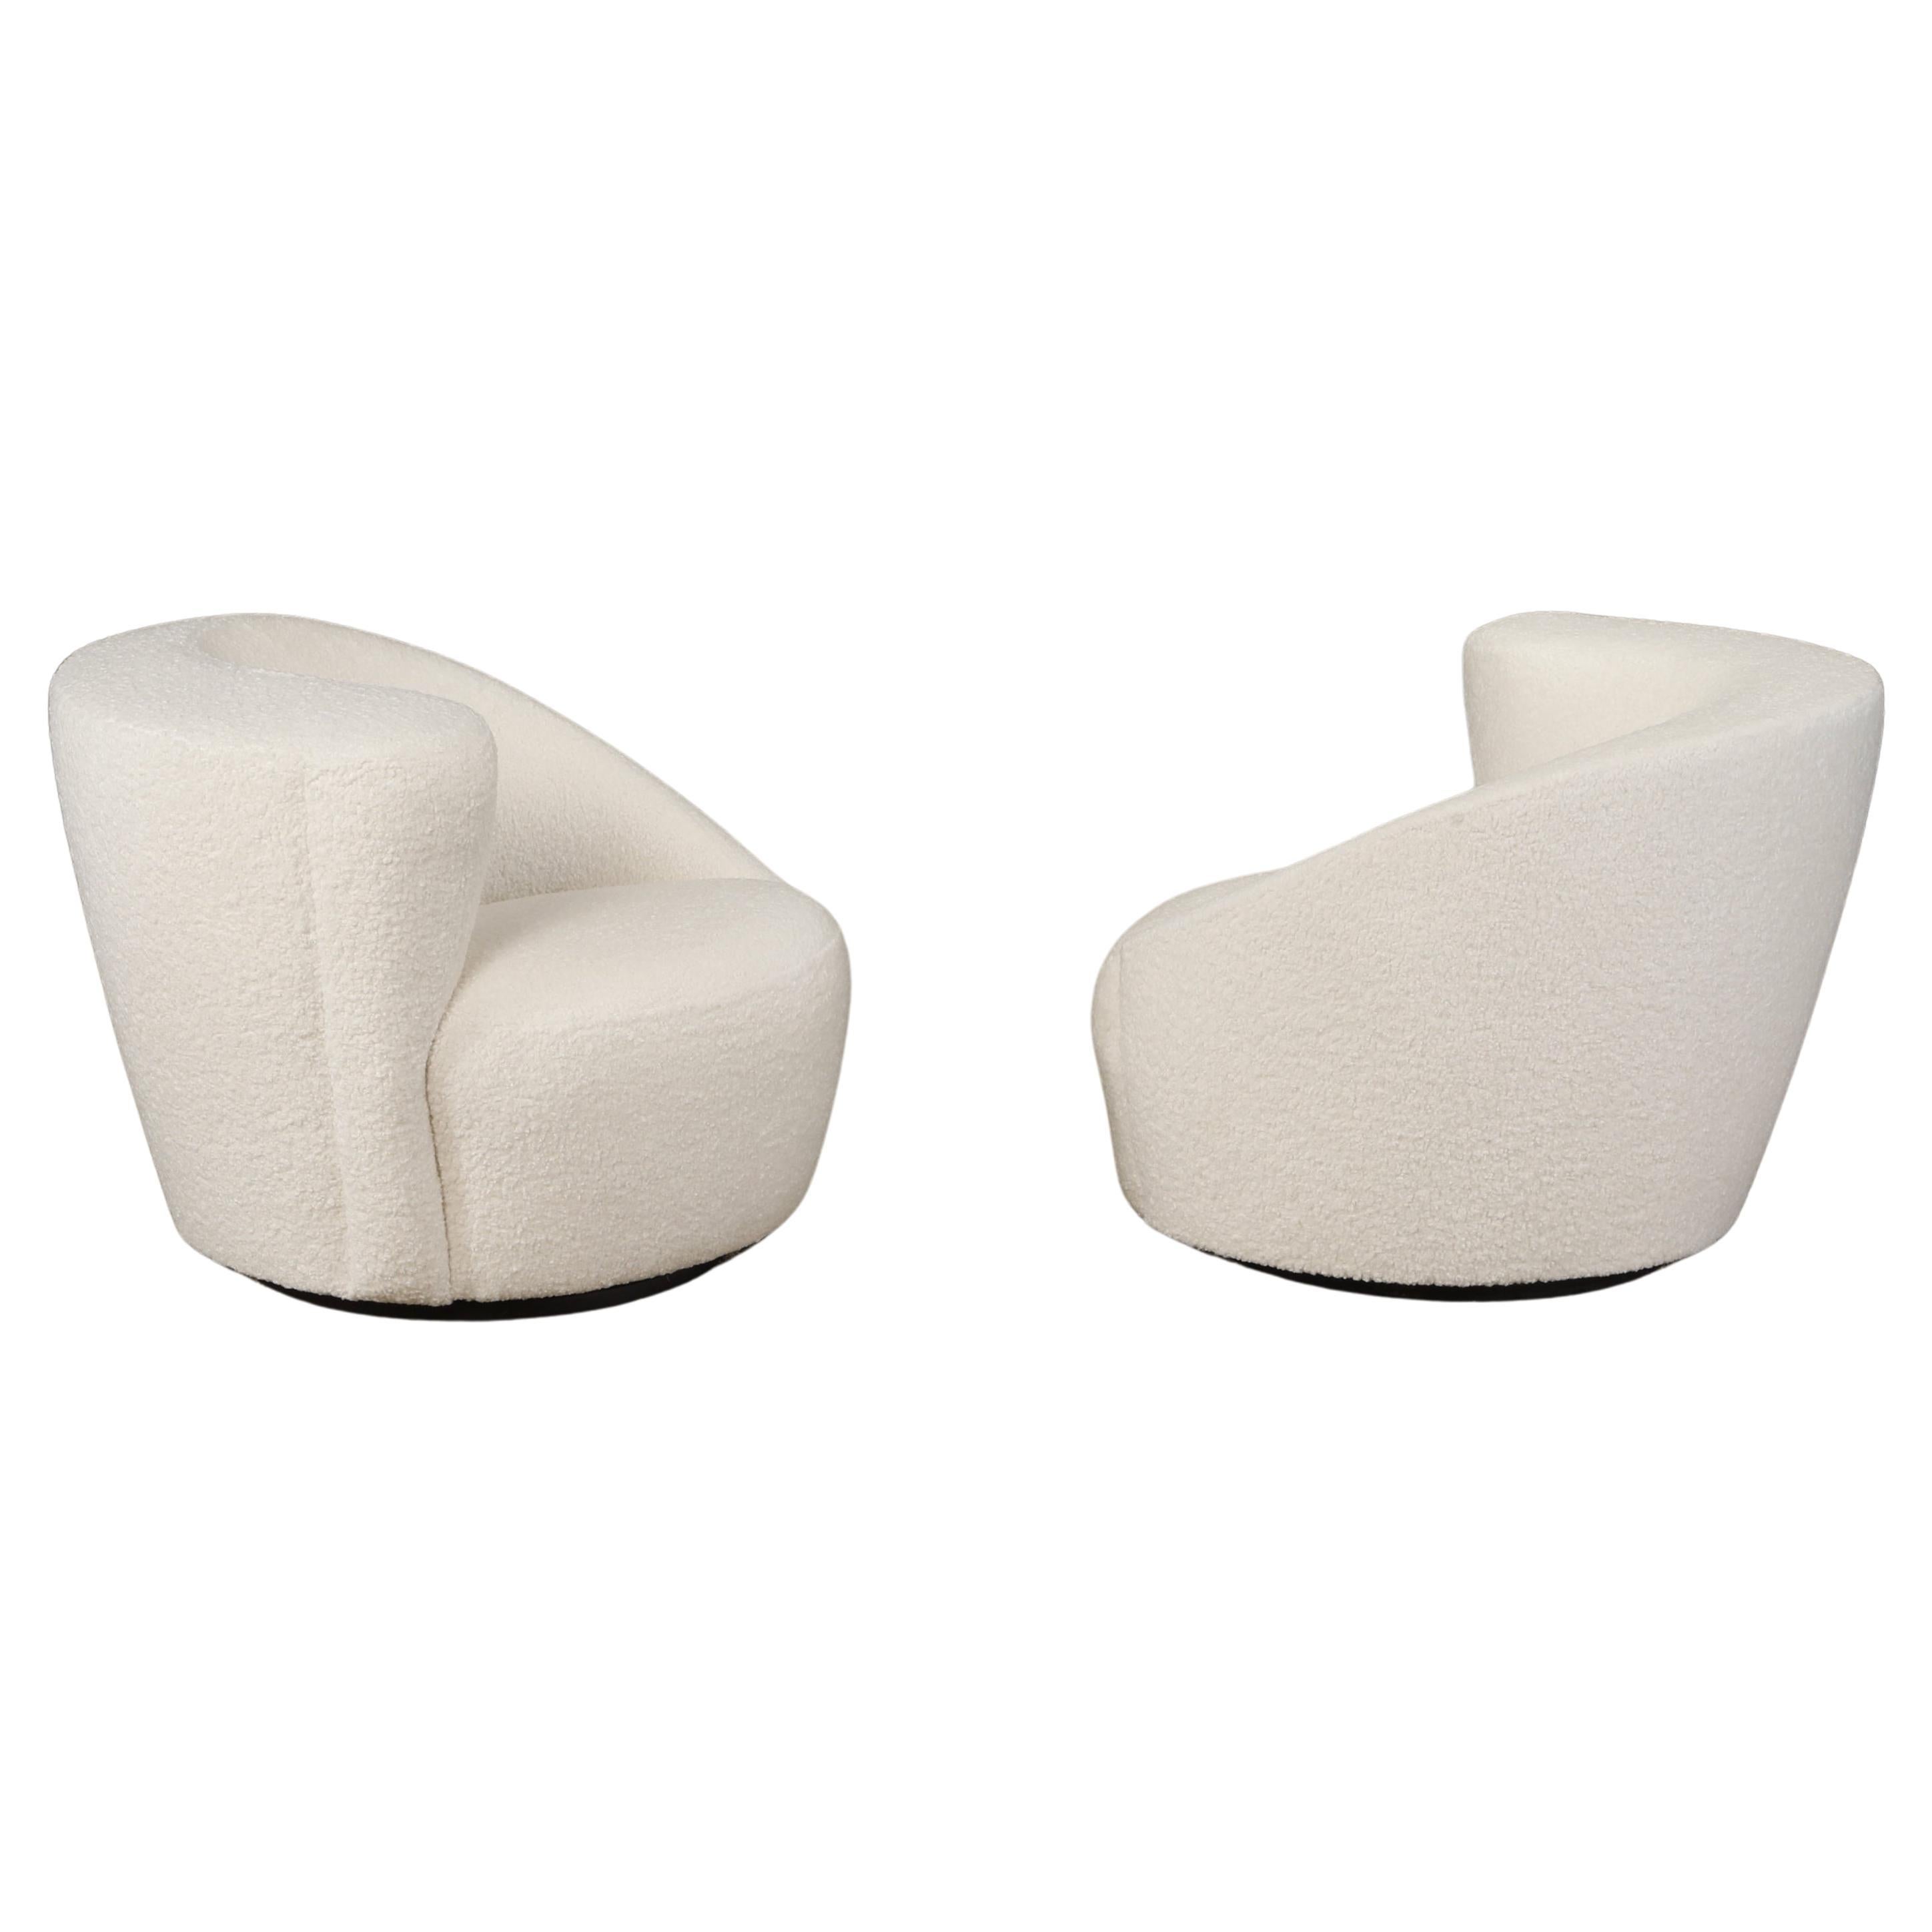 Vladimir Kagan Pair of Corkscrew Swivel Chairs for Directional in Bouclé, Signed For Sale